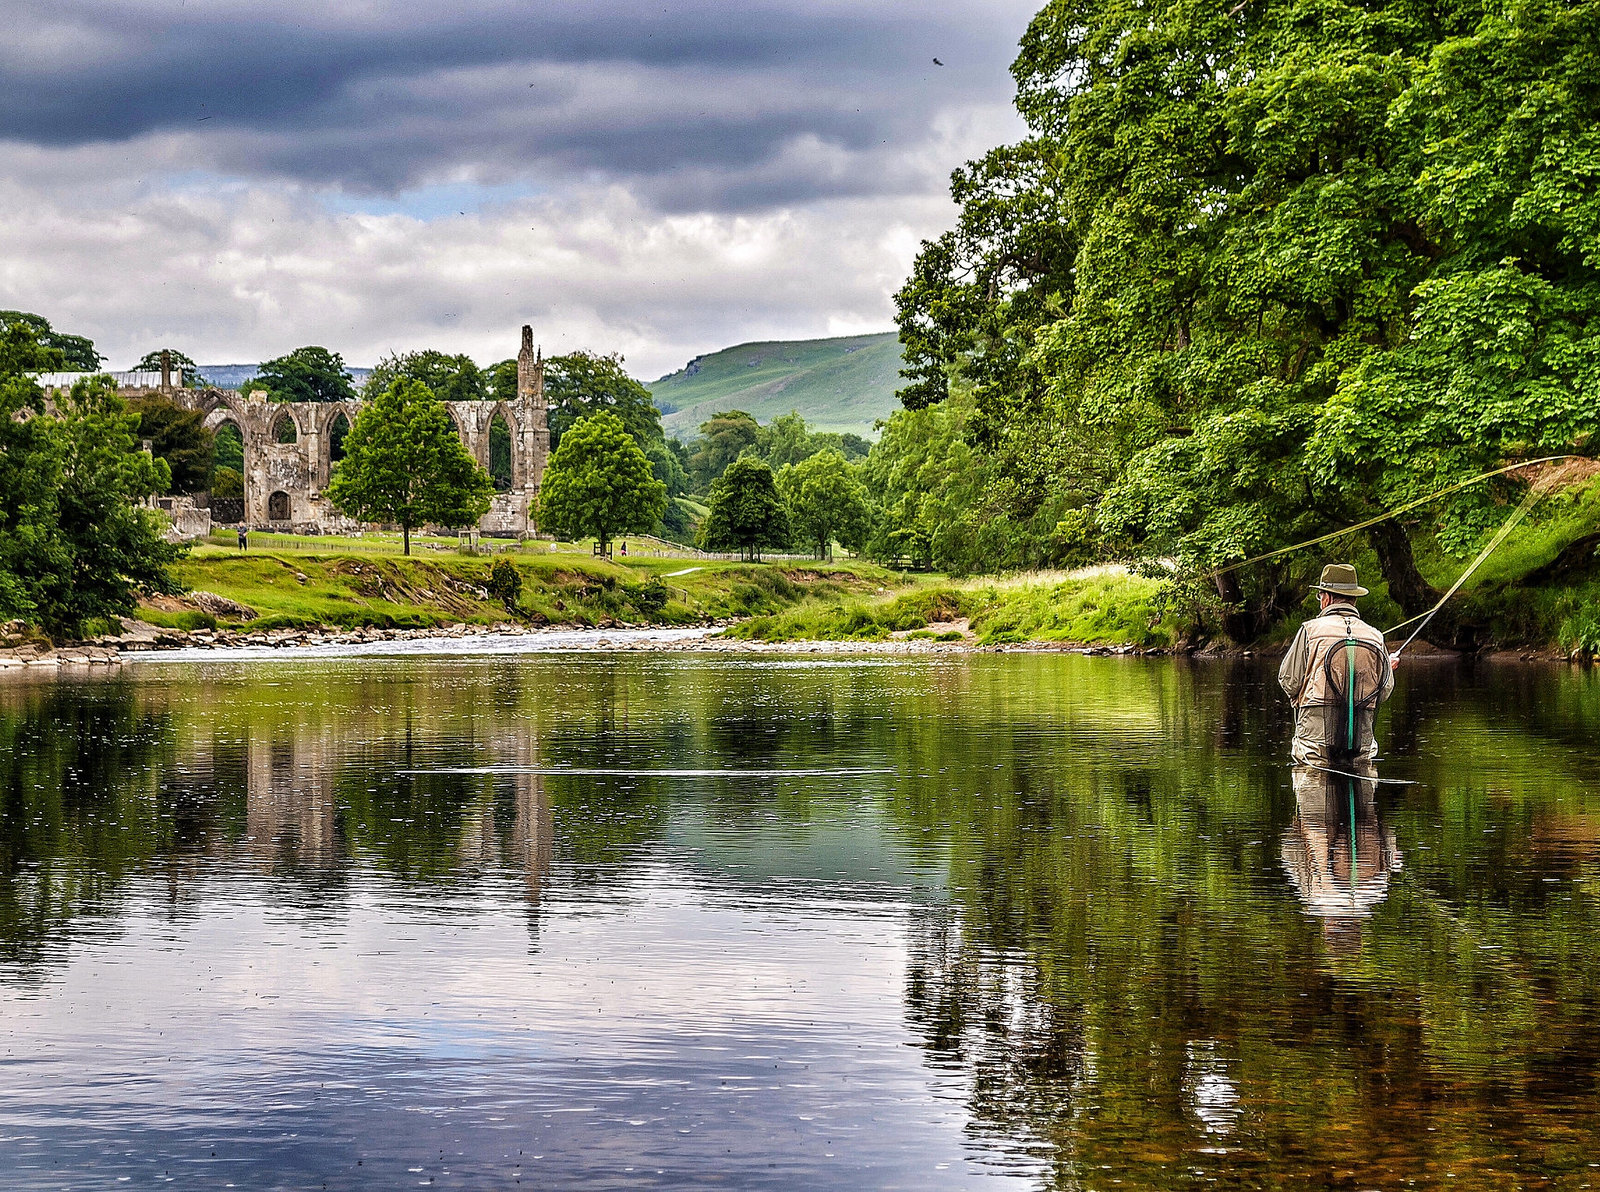 Fly Fishing in the River Wharfe next to Bolton Abbey, Wharfedale. Credit Carl Milner